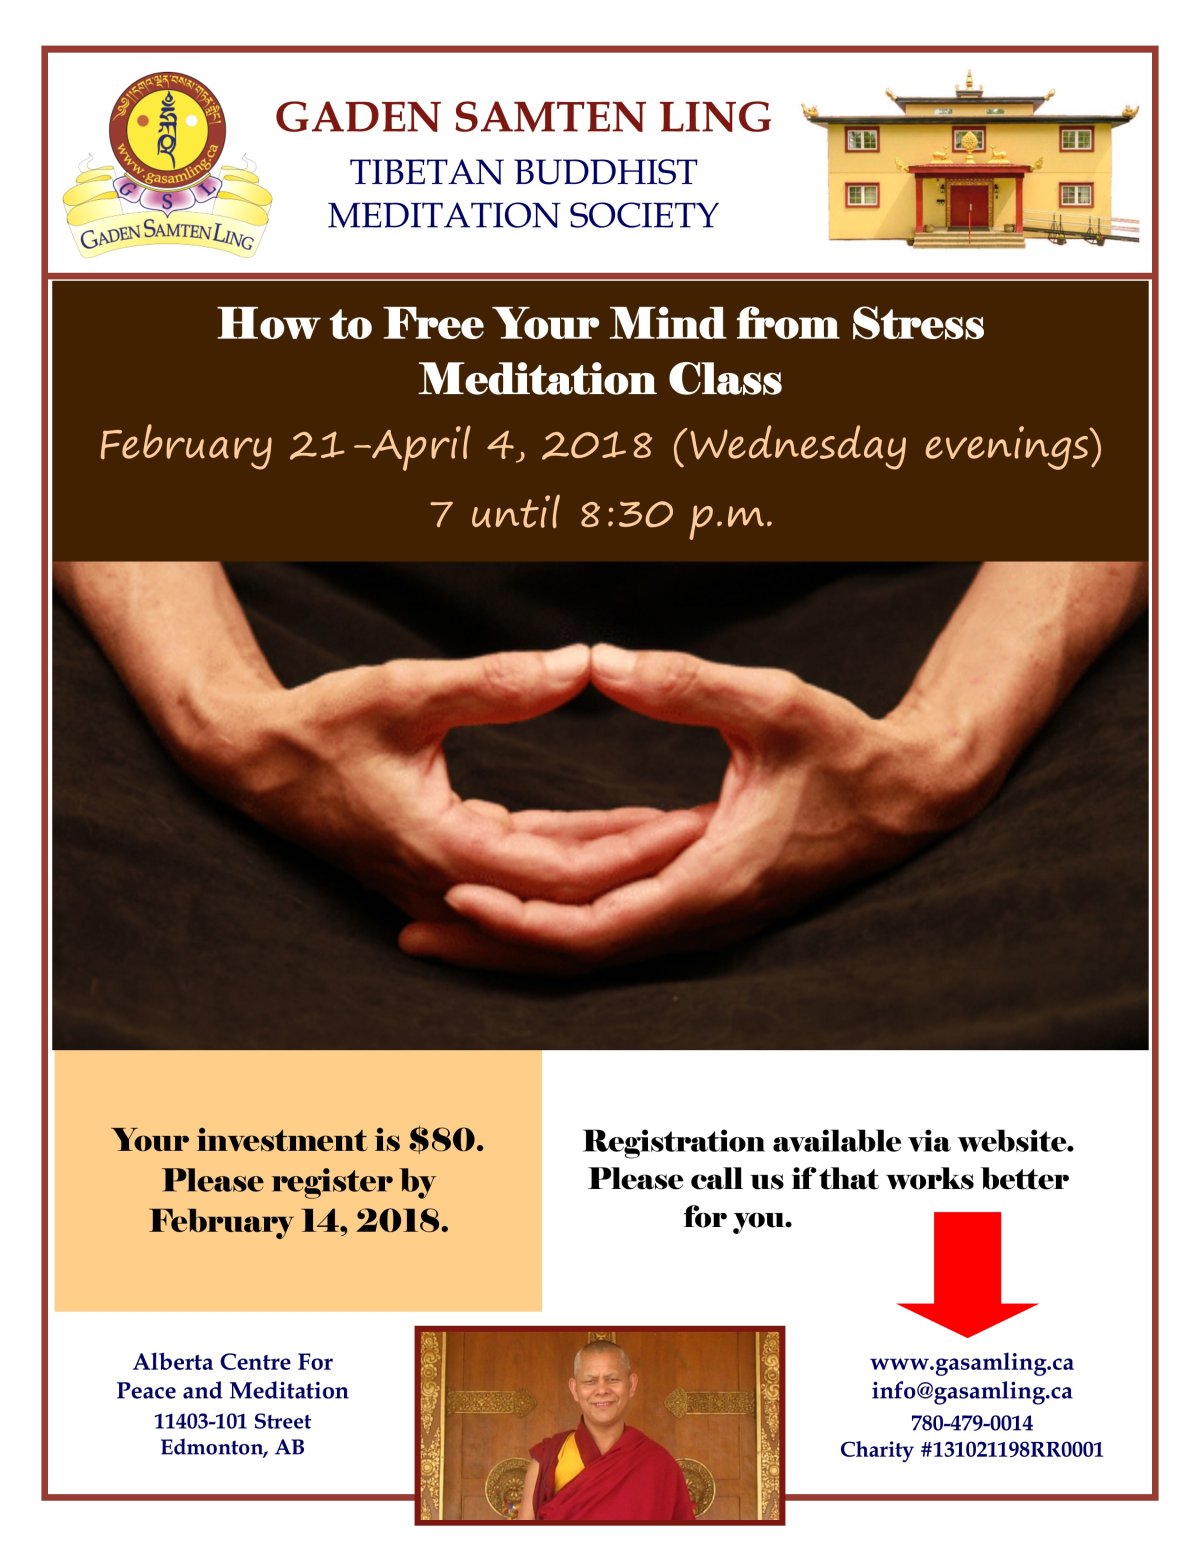 How to free your mind from stress meditation class - image